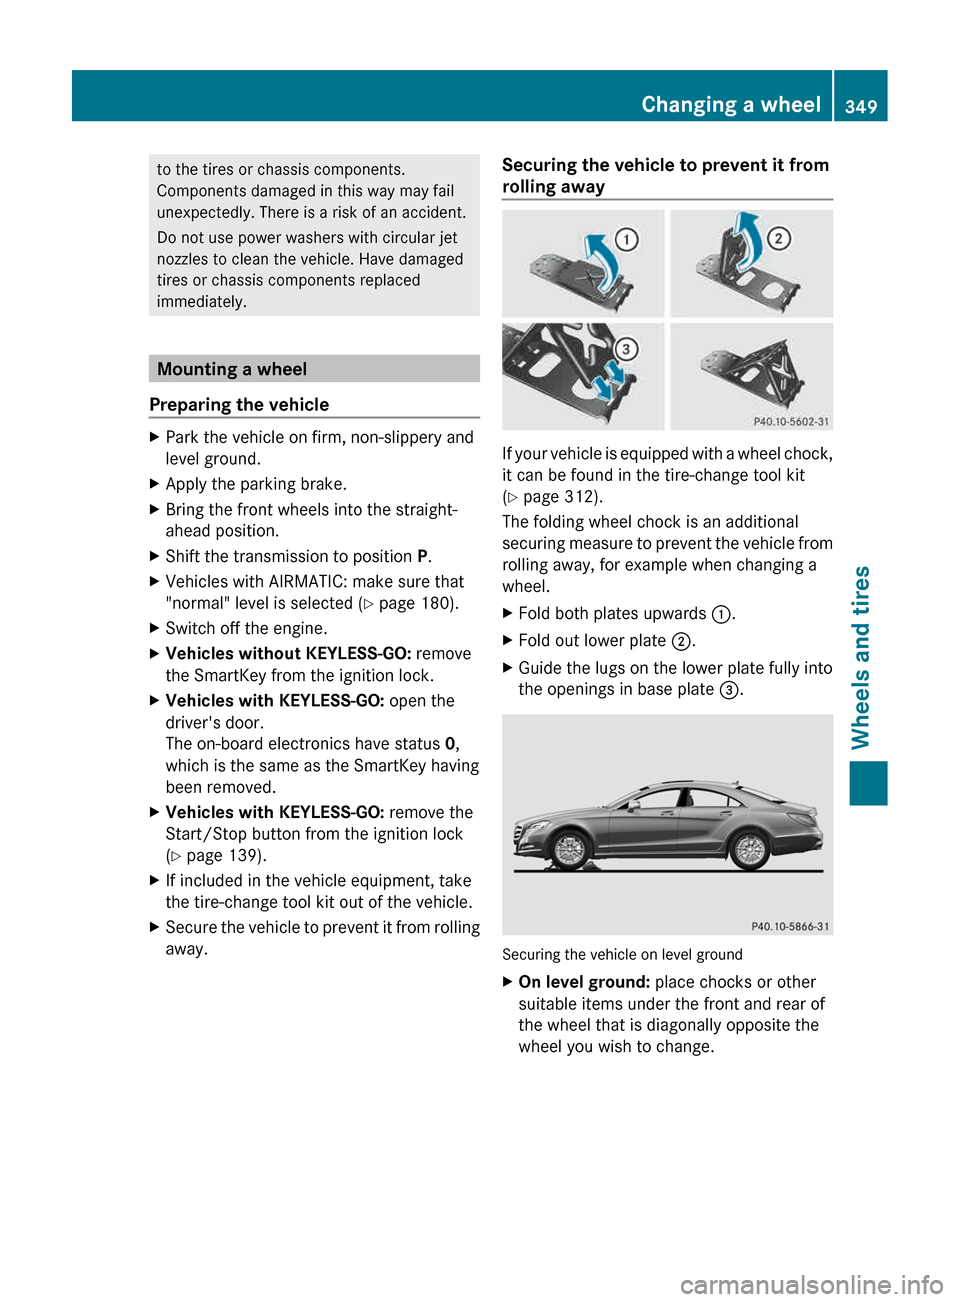 MERCEDES-BENZ CLS-Class 2013 W218 Owners Manual to the tires or chassis components.
Components damaged in this way may fail
unexpectedly. There is a risk of an accident.
Do not use power washers with circular jet
nozzles to clean the vehicle. Have 